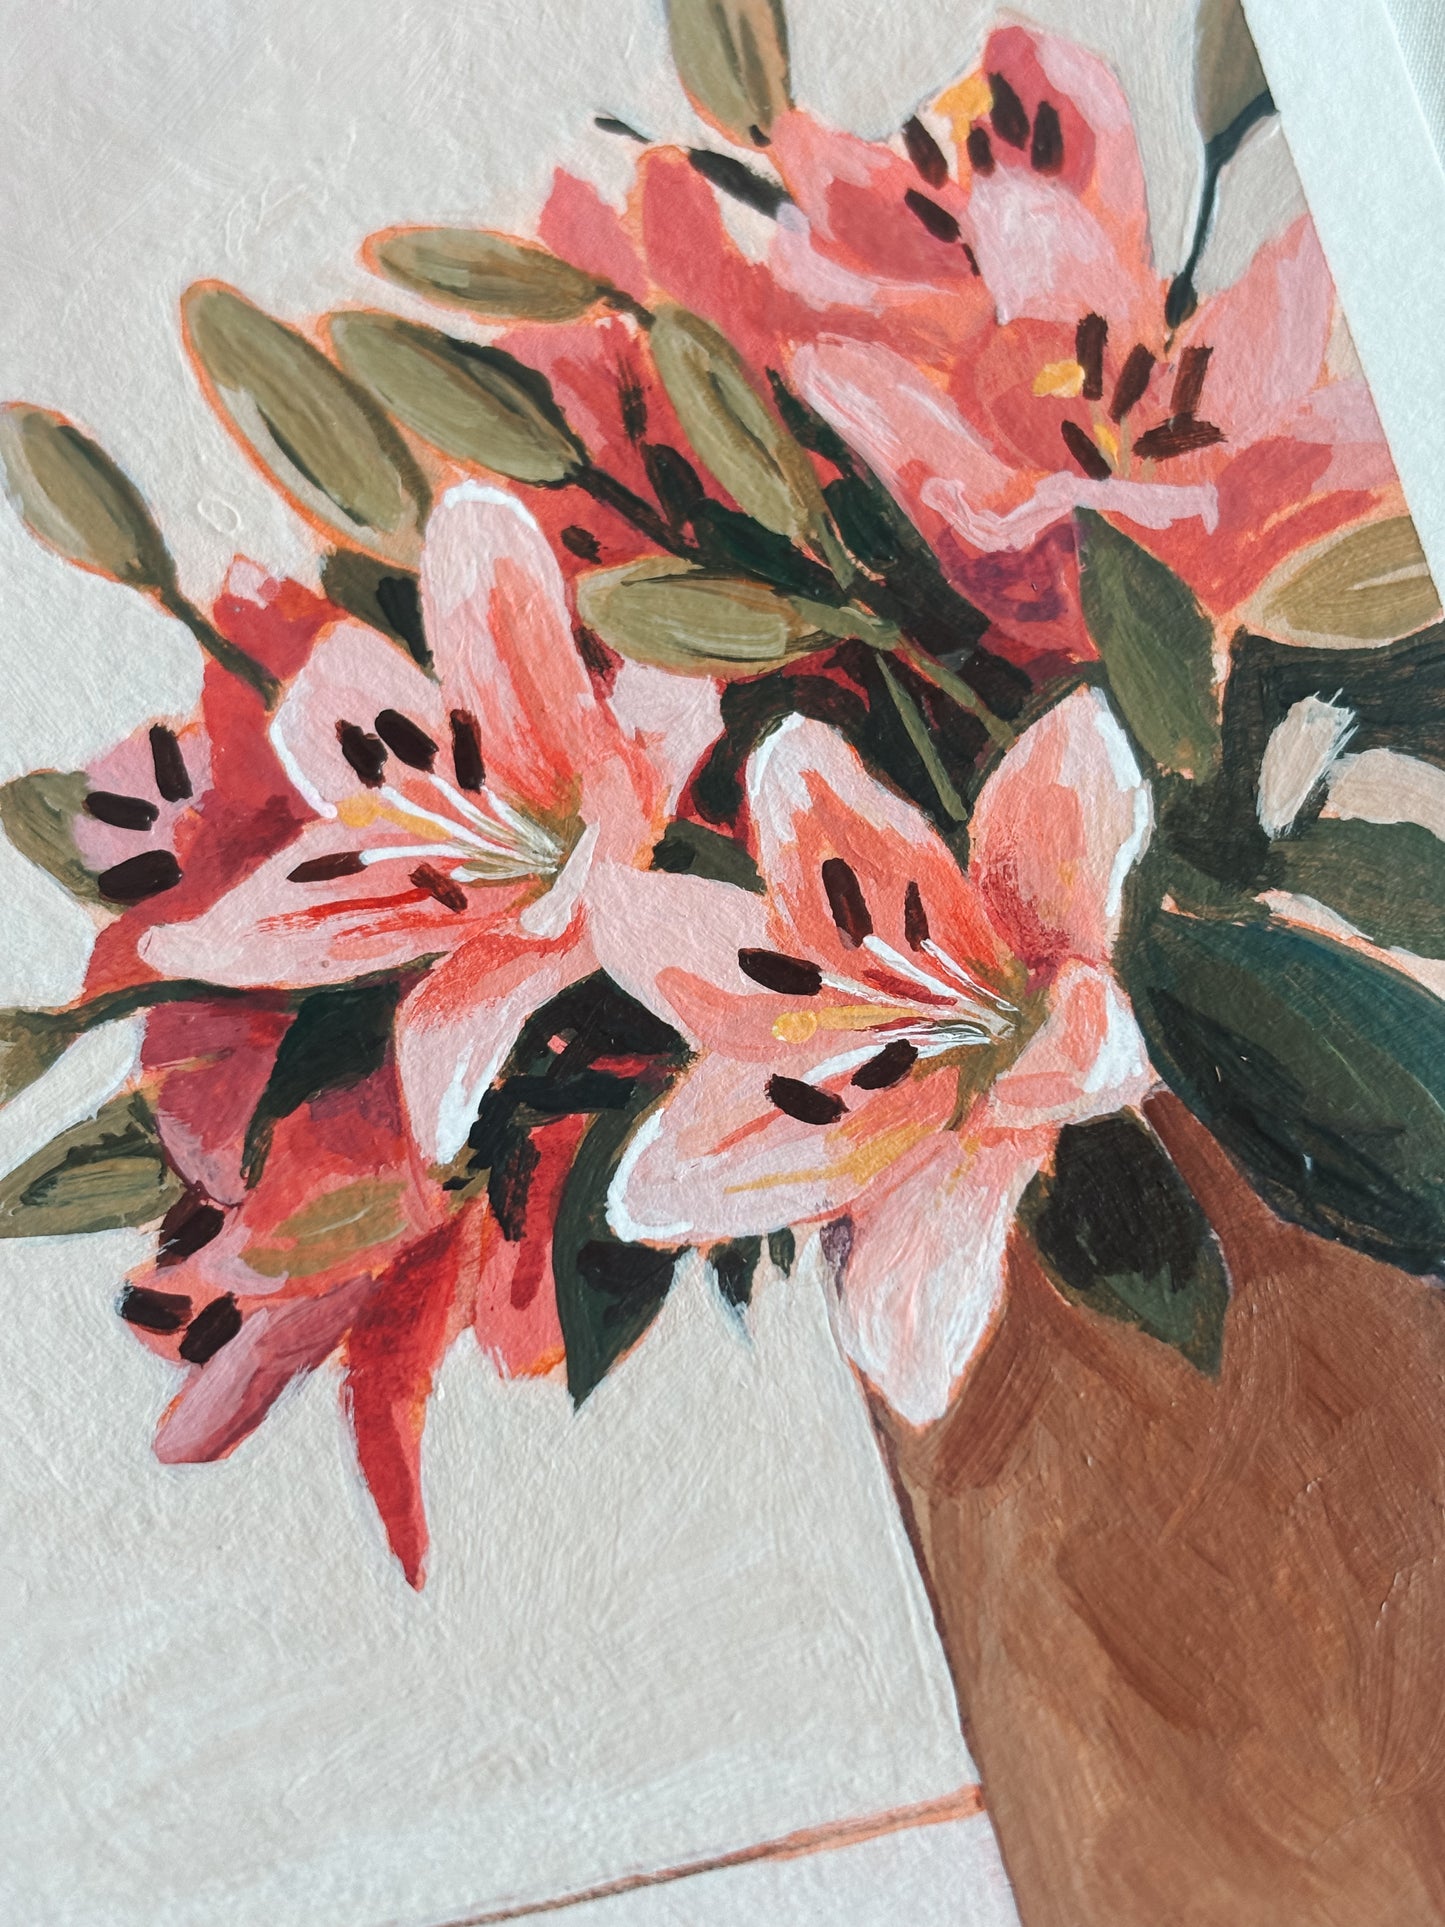 'Consider The Lilies' 4x6 inch original painting